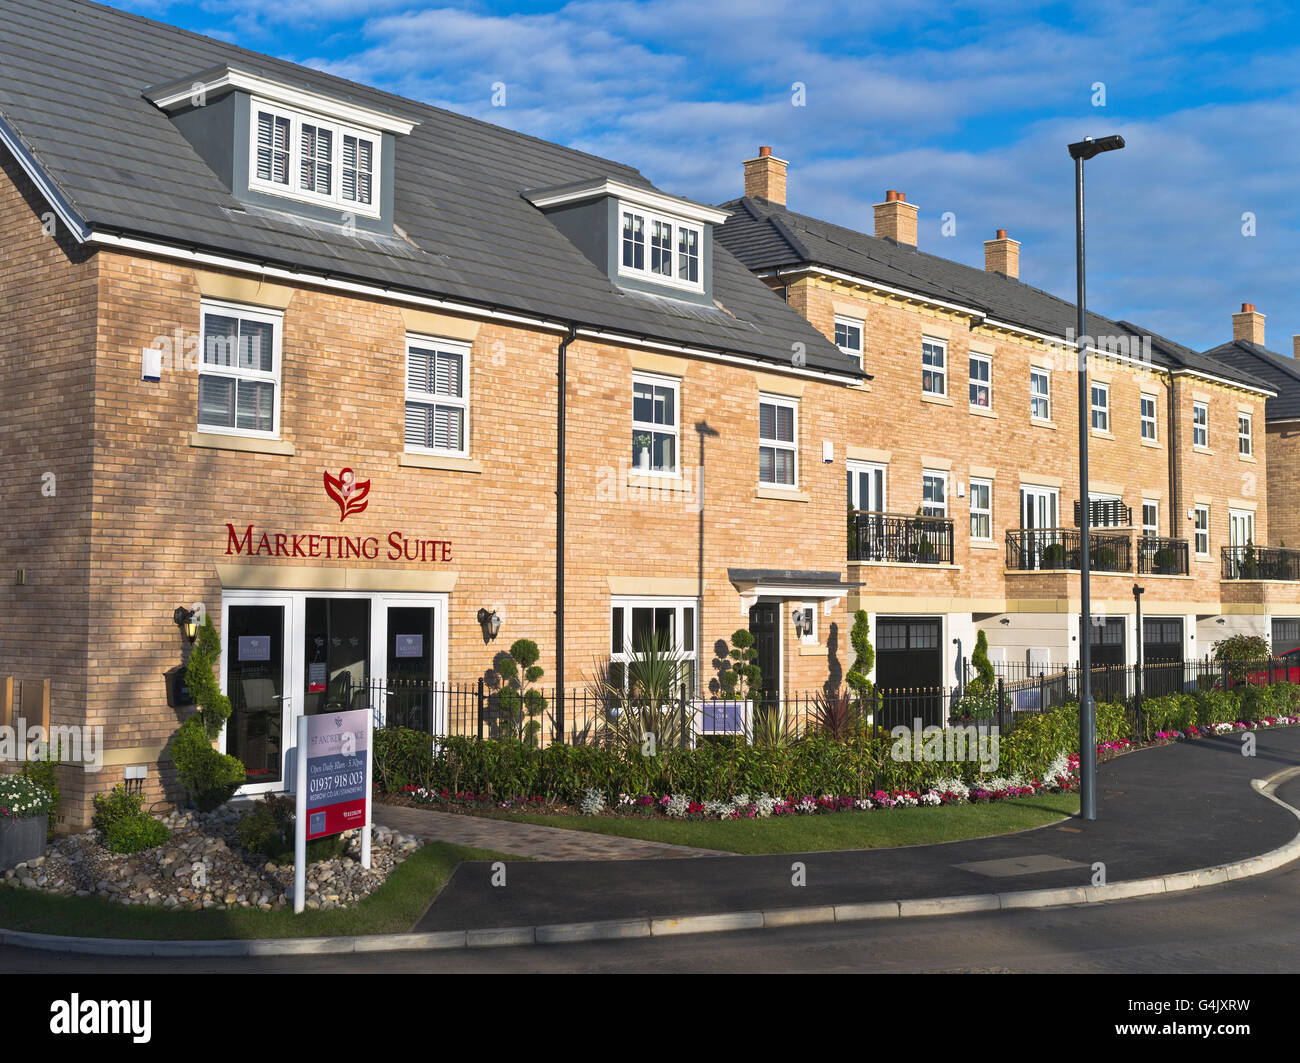 dh Showhome house REDROW HOMES UK ENGLAND uk new housing estate Redrow for sale show home houses yorkshire development Foto Stock